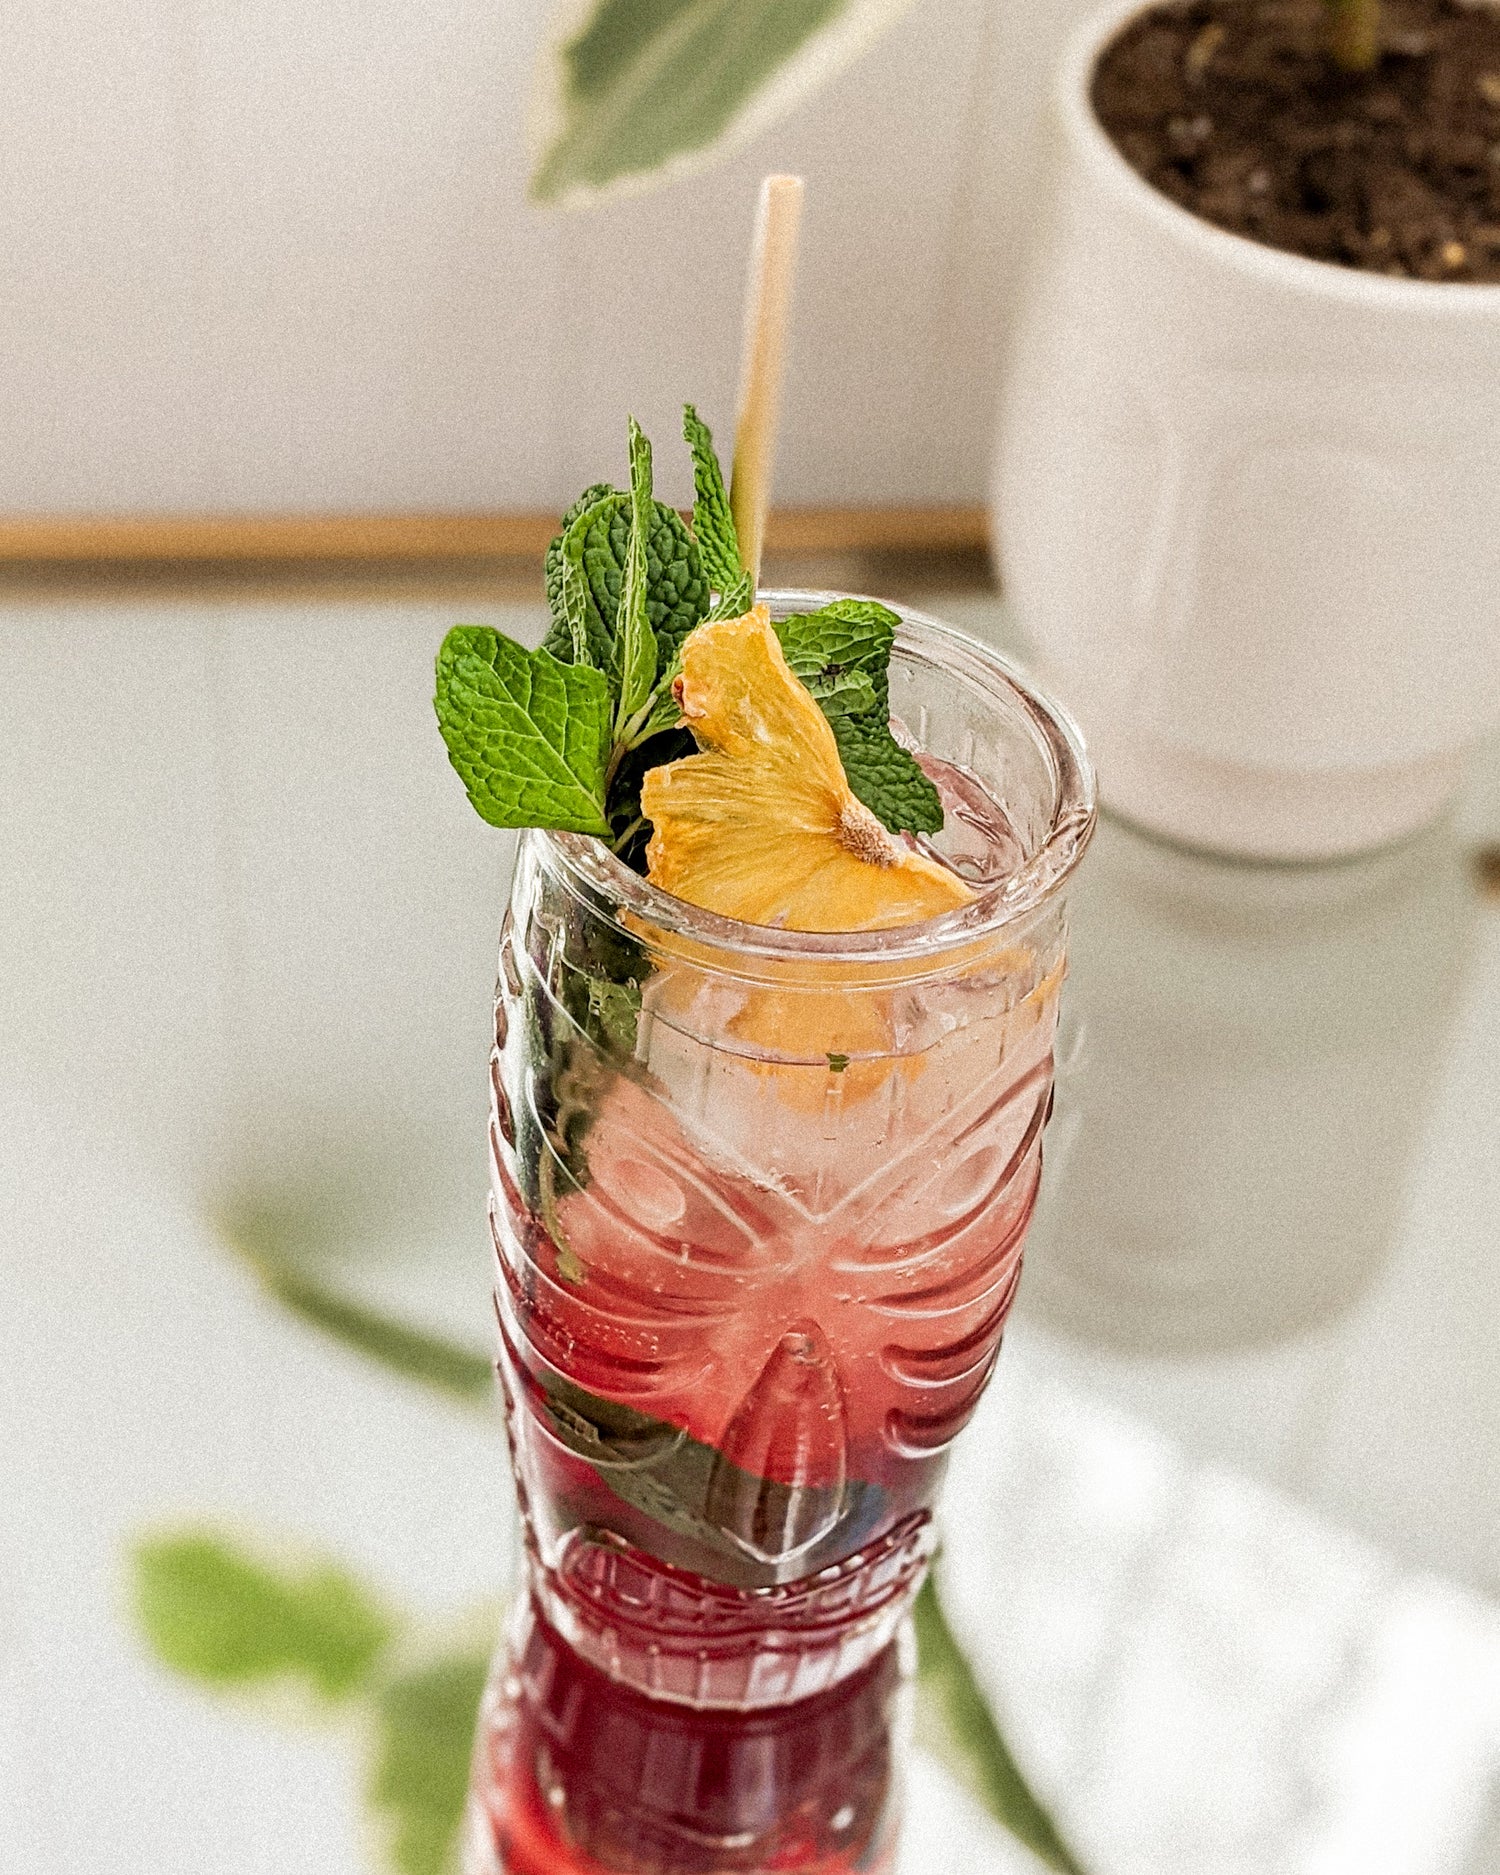 Blueberry Pineapple Fauxjito (Mocktail)